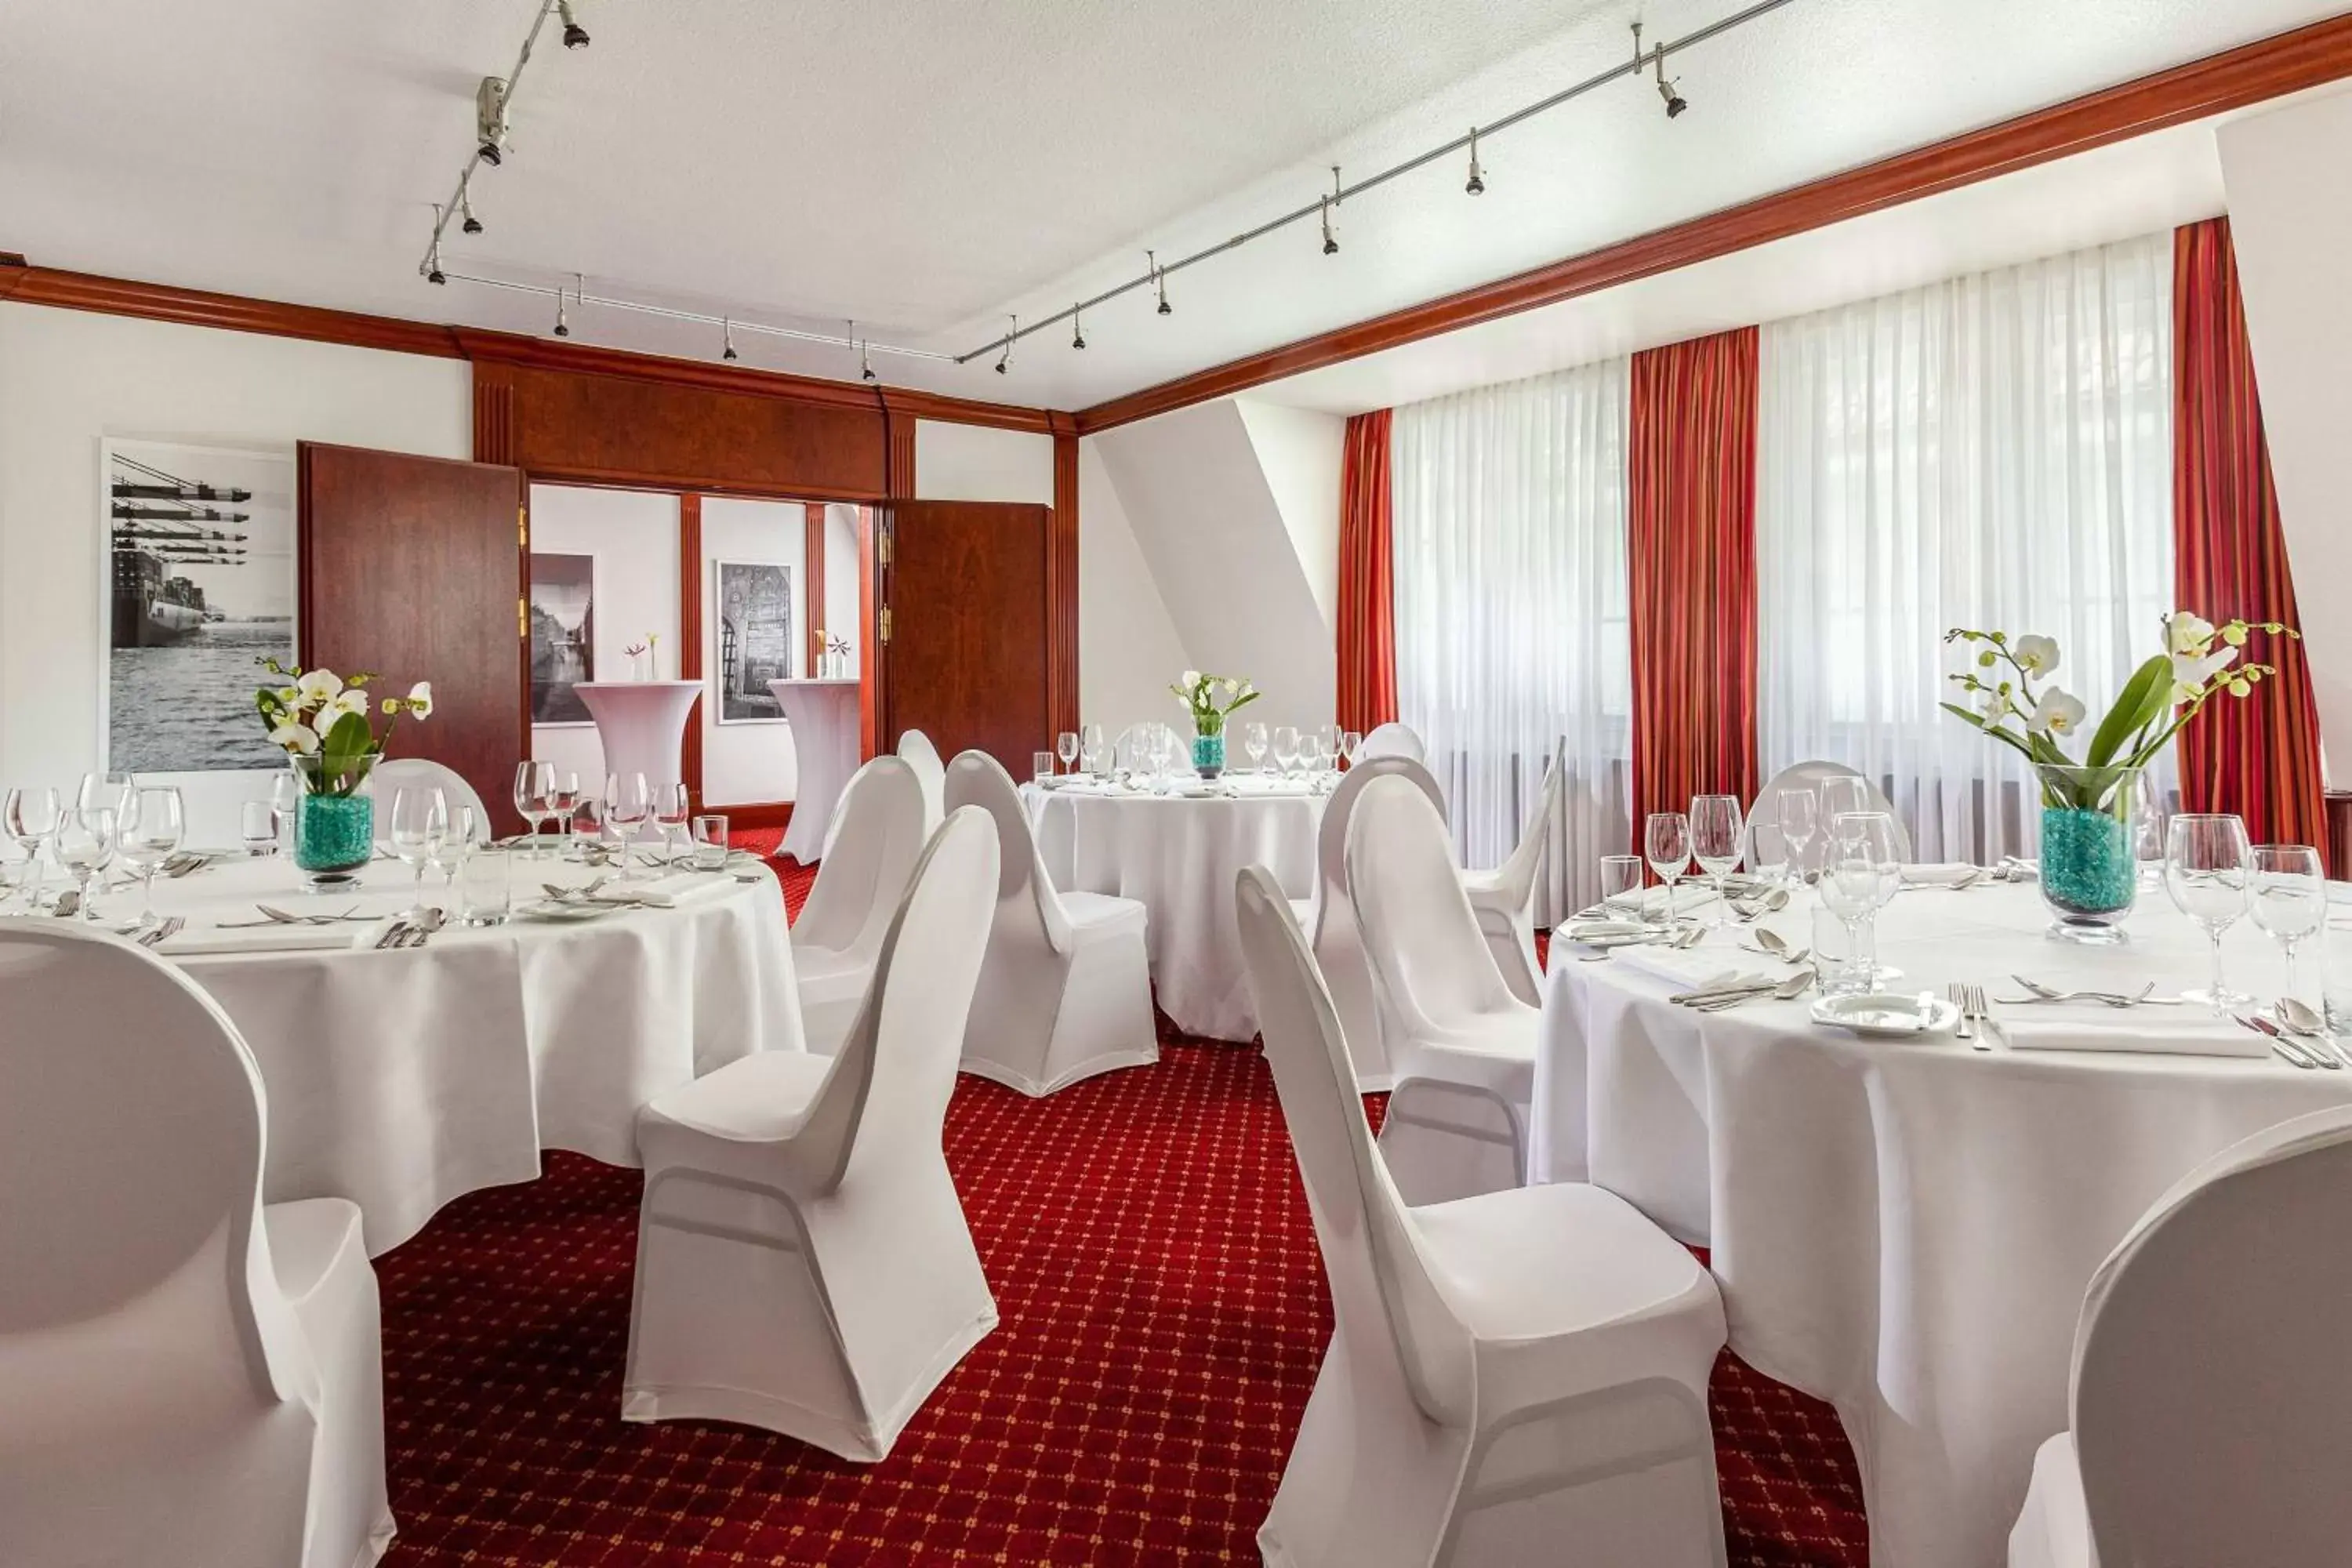 Meeting/conference room, Banquet Facilities in Courtyard by Marriott Hamburg Airport